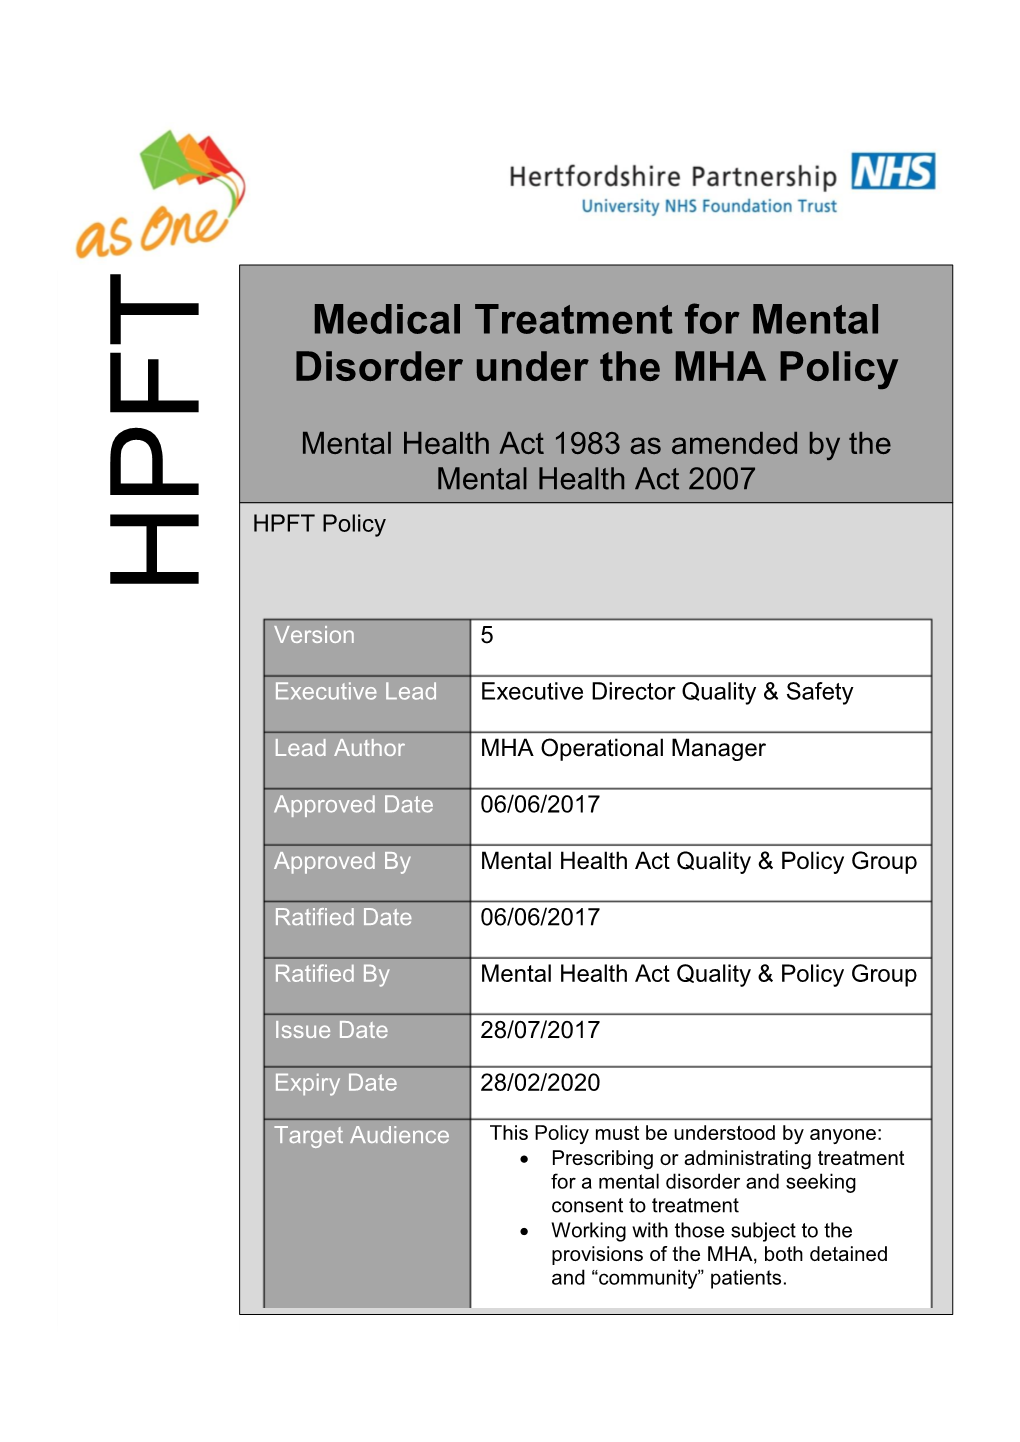 Medical Treatment for Mental Disorder Under the MHA Policy